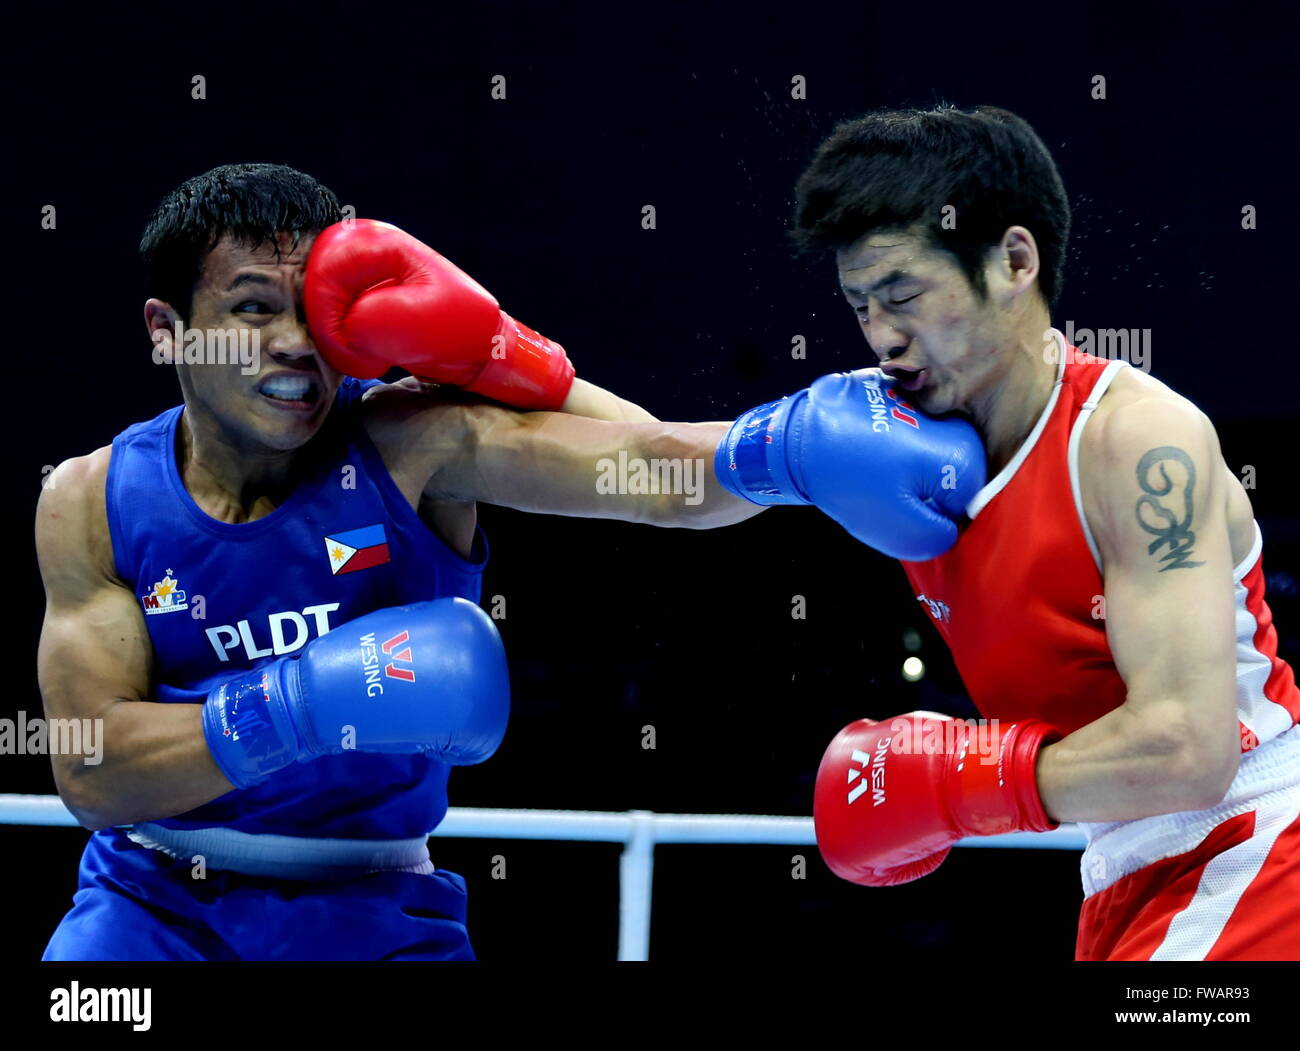 Qian'an, China's Hebei Province. 2nd Apr, 2016. Otgondalai Dorjnymuu (R) of Mongolia competes against Charly Coronel Suarez of the Philippines during the final match of the men's 60kg category competition at the Asia/Oceania Zone boxing event qualifier for 2016 Rio Olympic Games in Qian'an, north China's Hebei Province, April 2, 2016. Dorjnymuu won 2-1 to claim the title. © Yang Shiyao/Xinhua/Alamy Live News Stock Photo